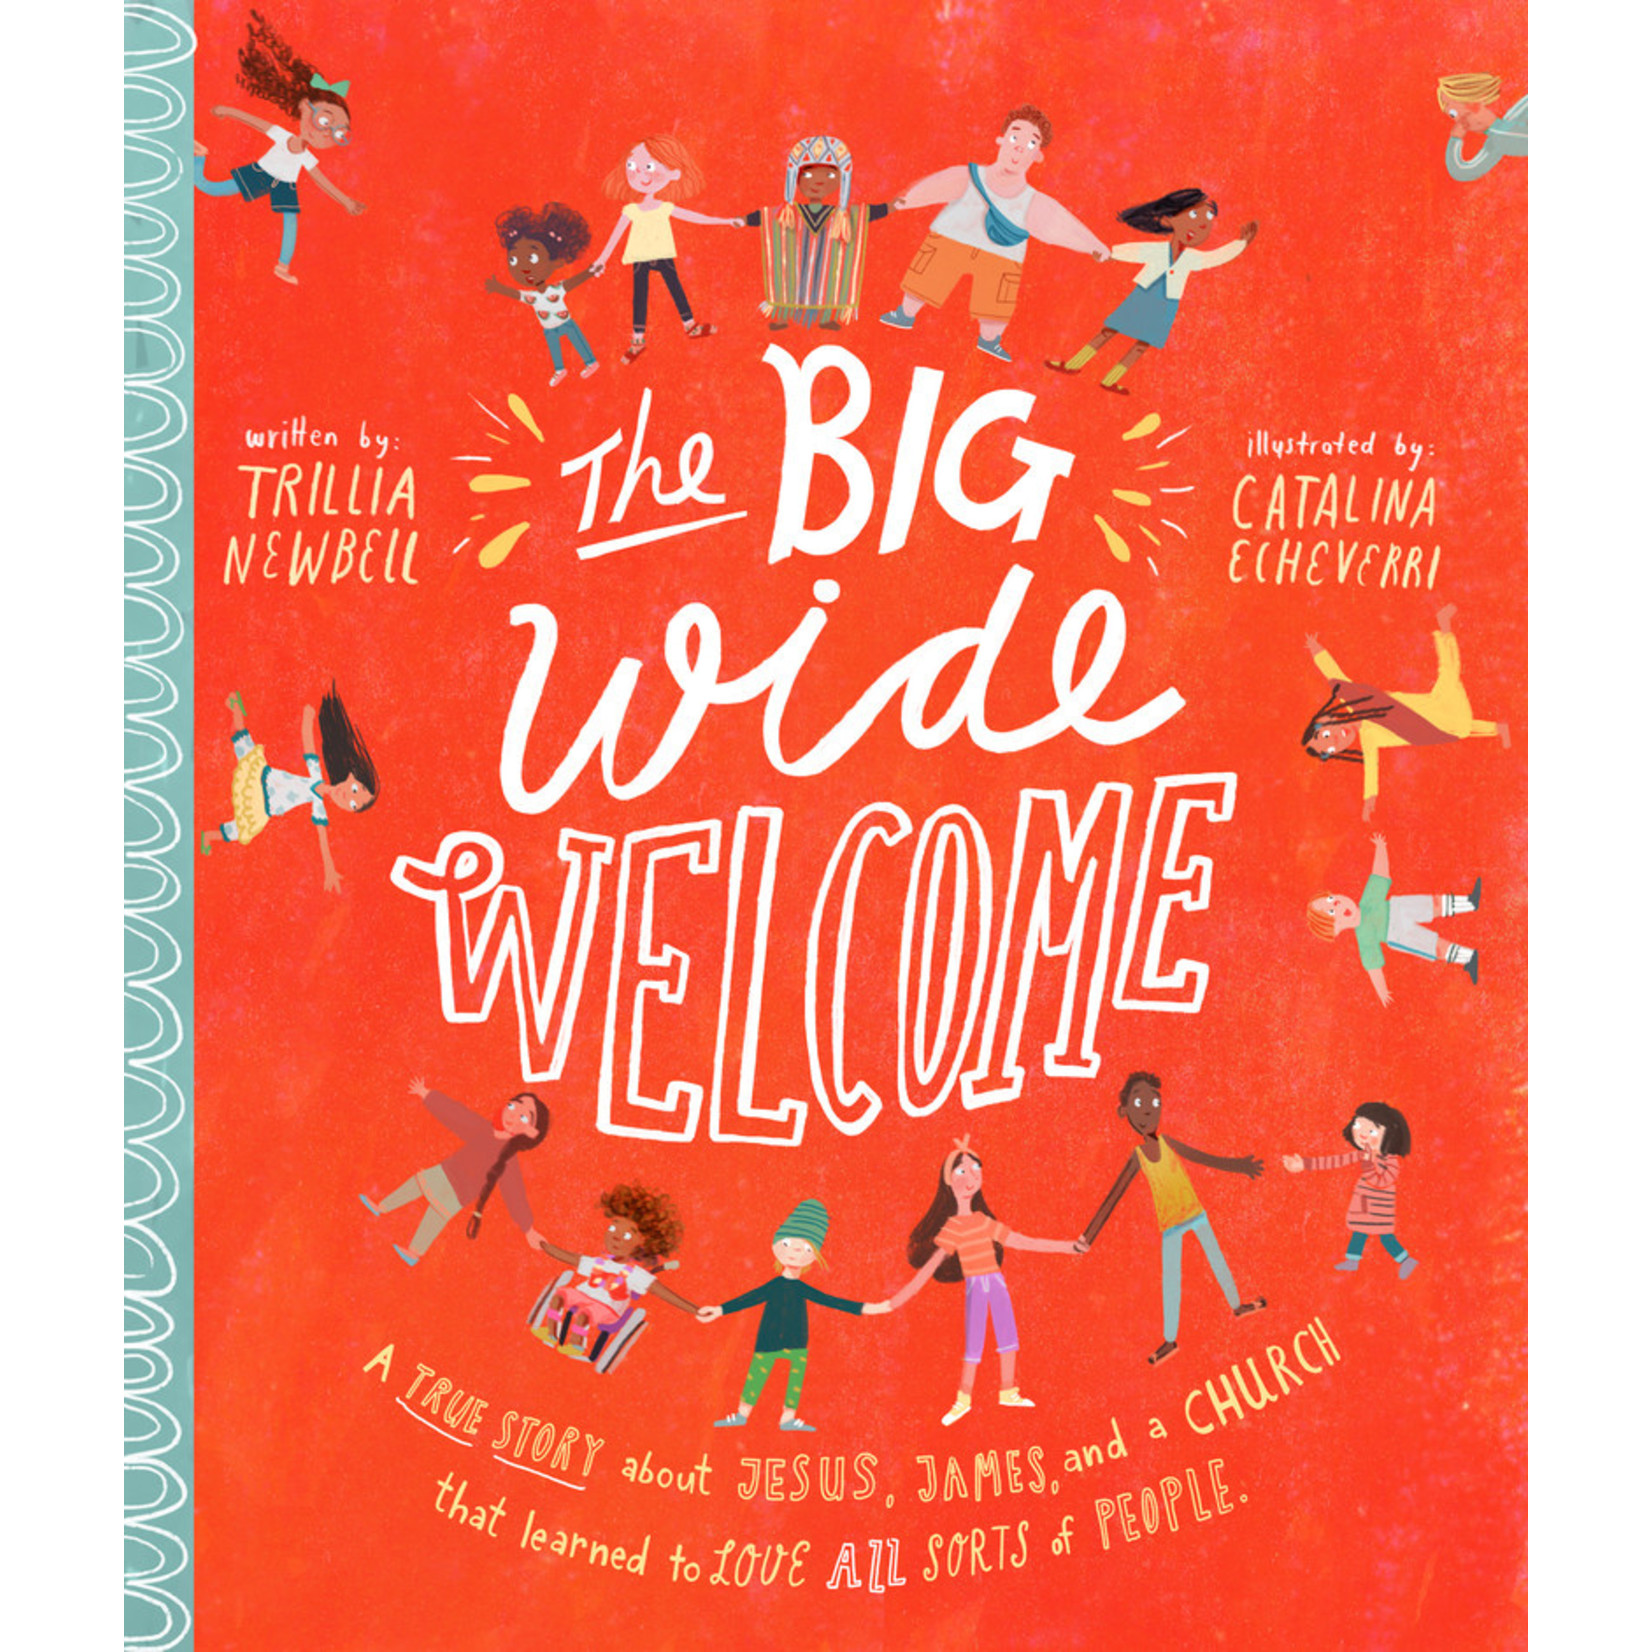 The Good Book Company The Big Wide Welcome Storybook: A True Story About Jesus, James, and a Church That Learned to Love All Sorts of People